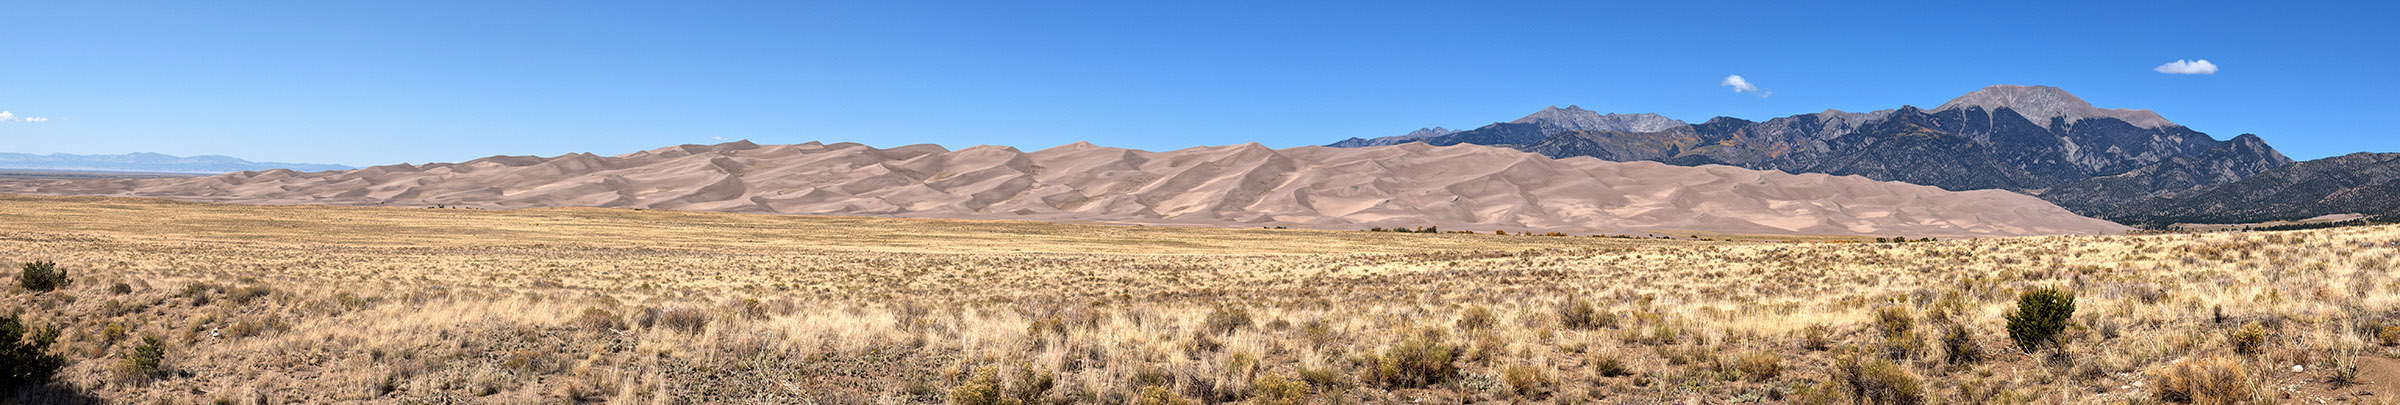 Montage of Great Sand Dunes National Park.  Winds blowing from the Southwest from the San Luis Valley deposited sand in an area protected by 3 low passes in the Sangre de Cristo mountain range.  Most of the sand probably was deposited in the Pleistocene (10,000 years ago).